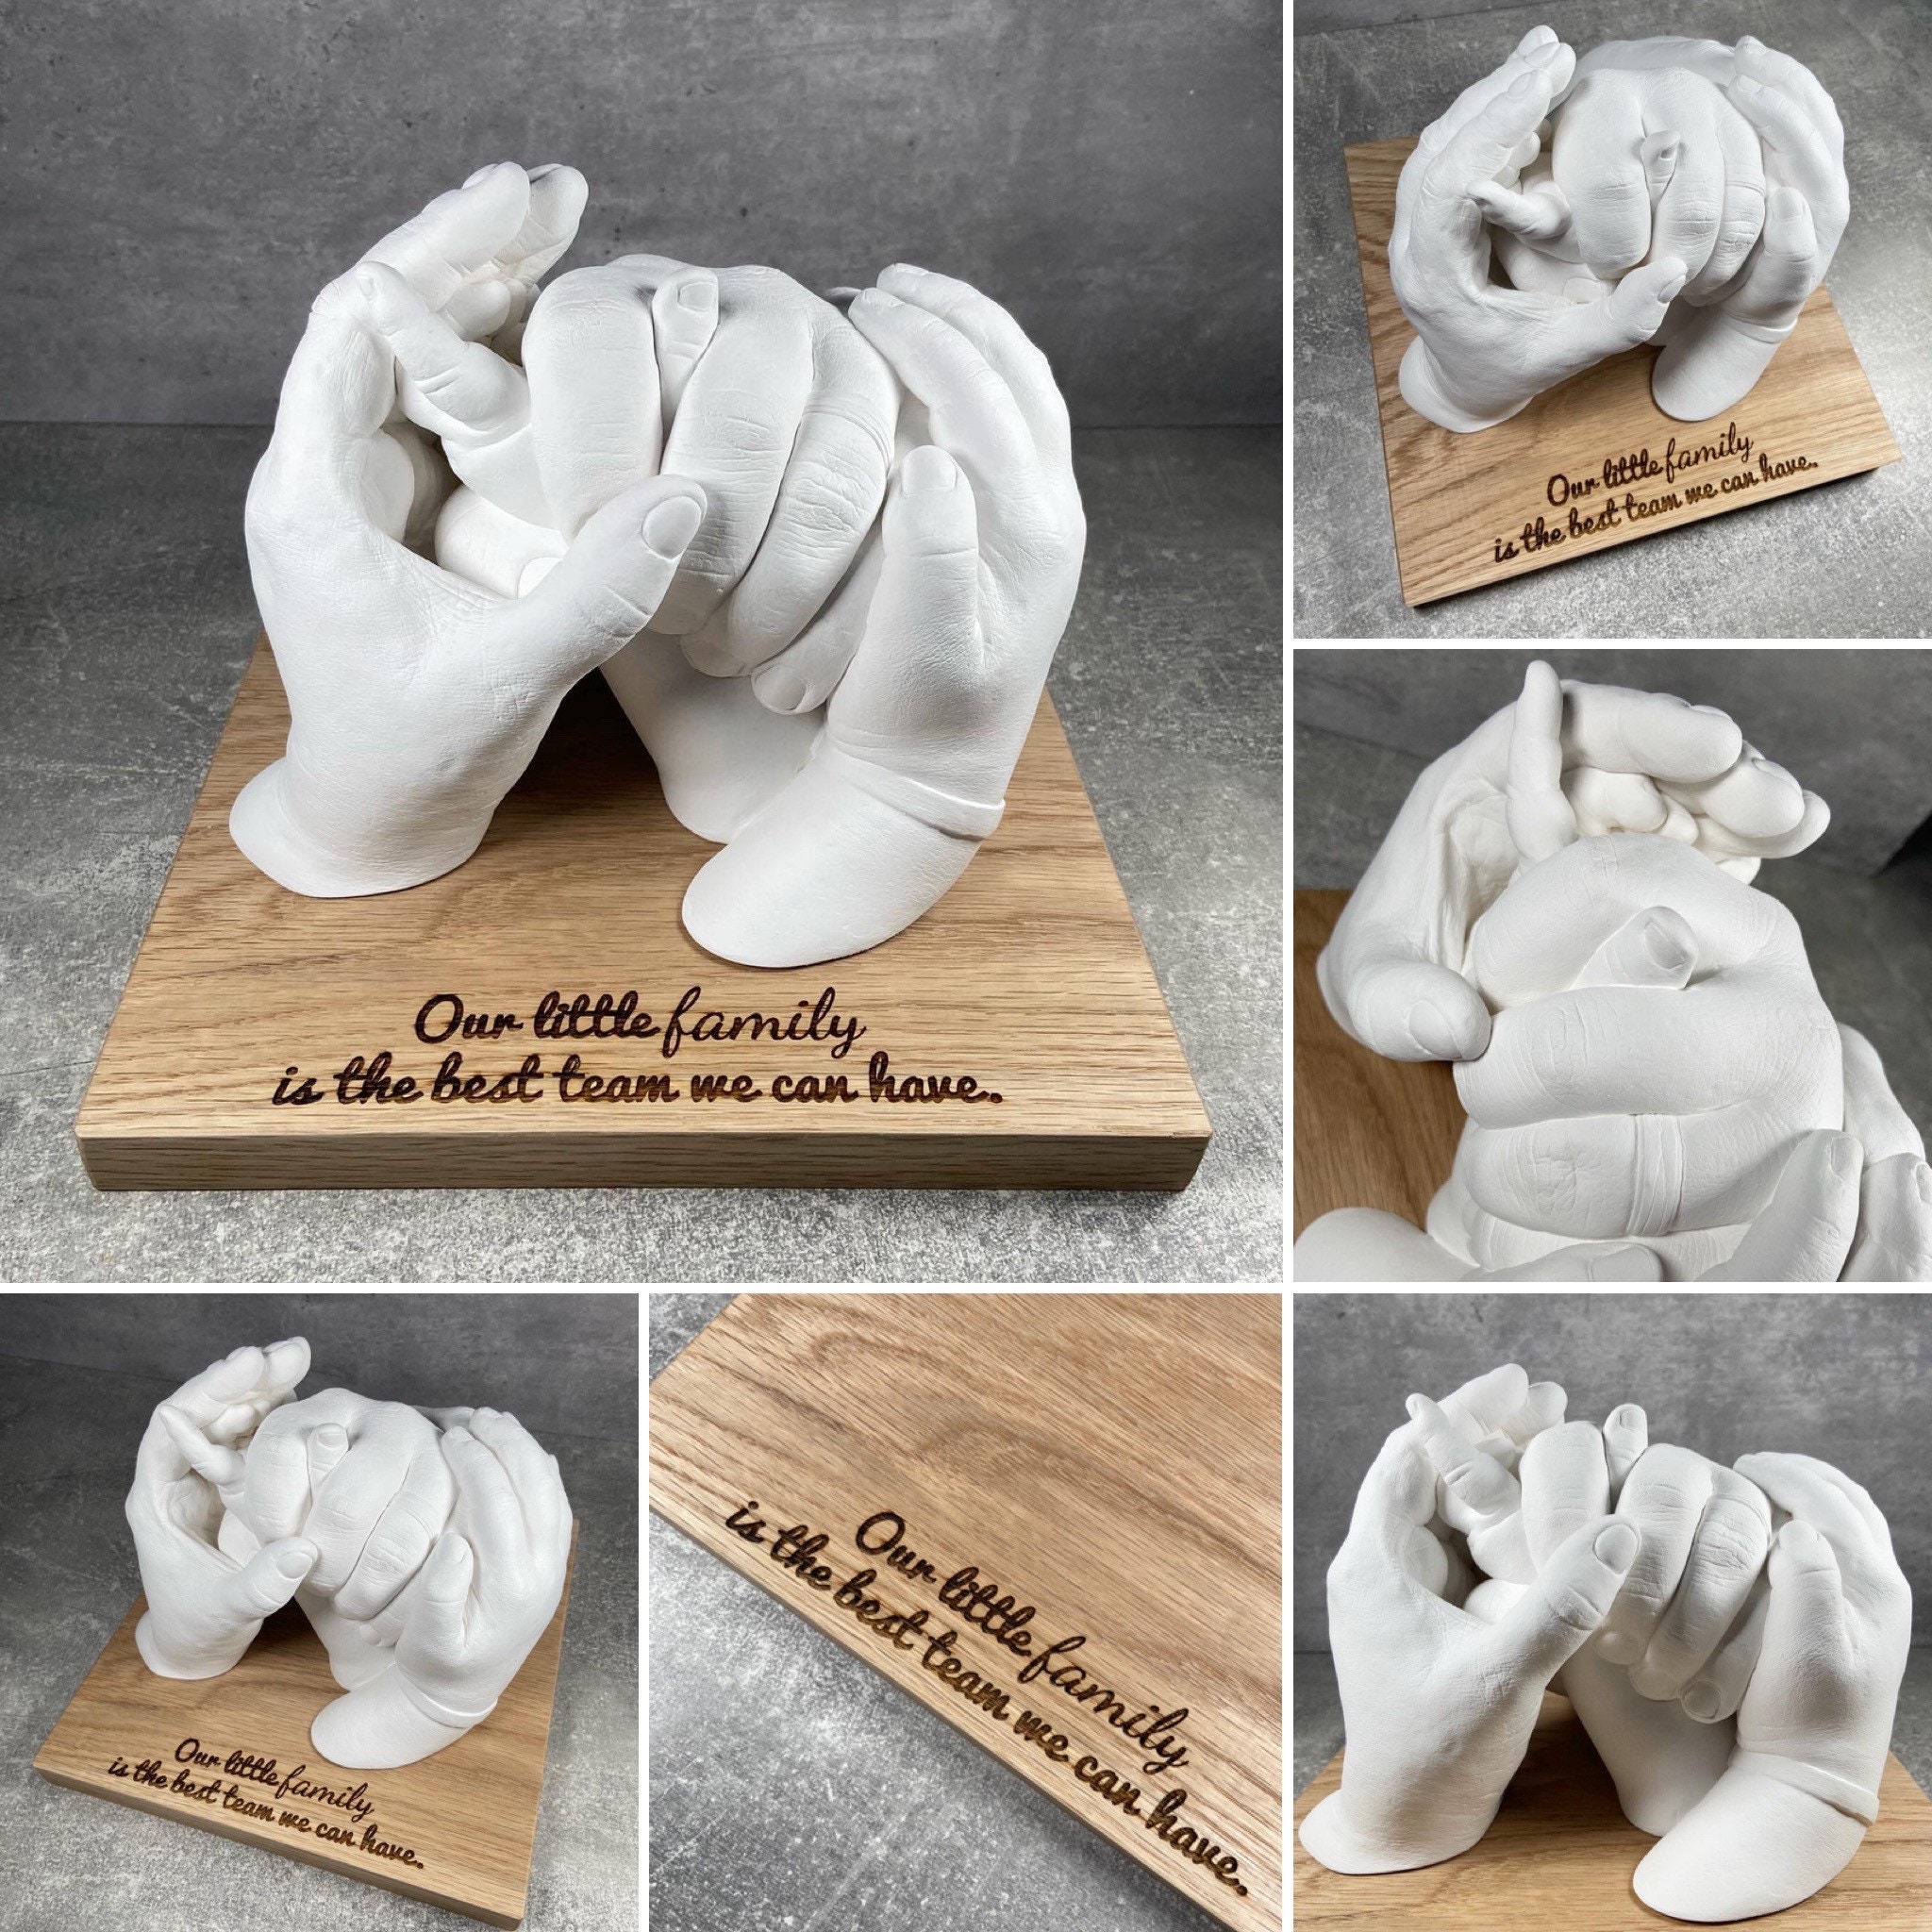 Family Hand Casting Kit with Practice Kit - Casts 3 Person Hands Keepsakes- DIY Plaster Hand Molding Kit